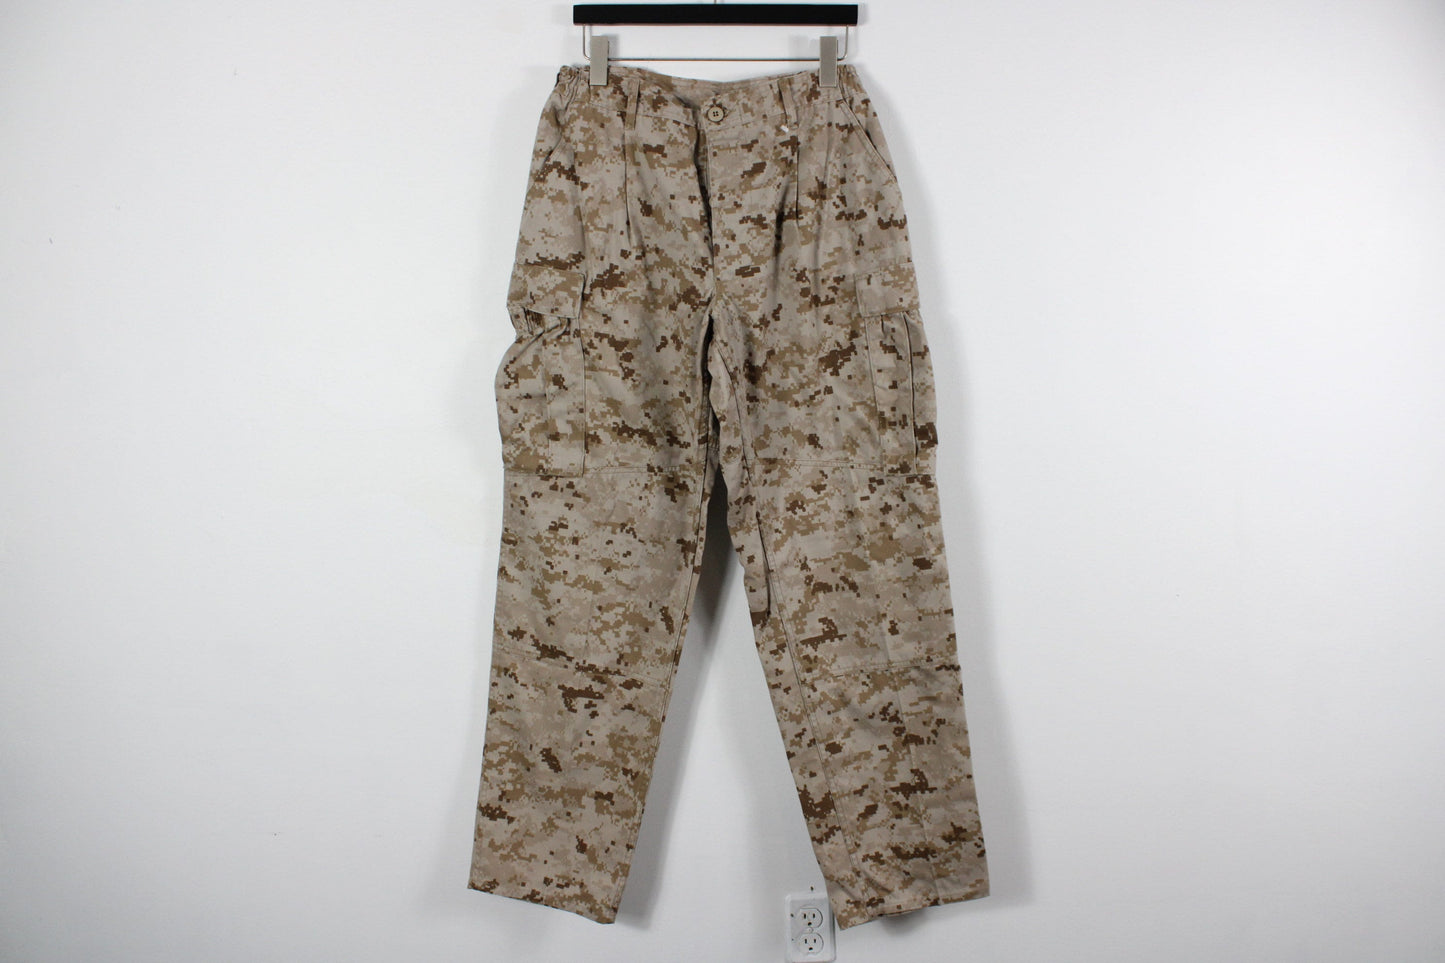 Vintage Camo Pants / Military Green Camouflage Combat Trouser / 90s Army Fatigue / 80s Surplus